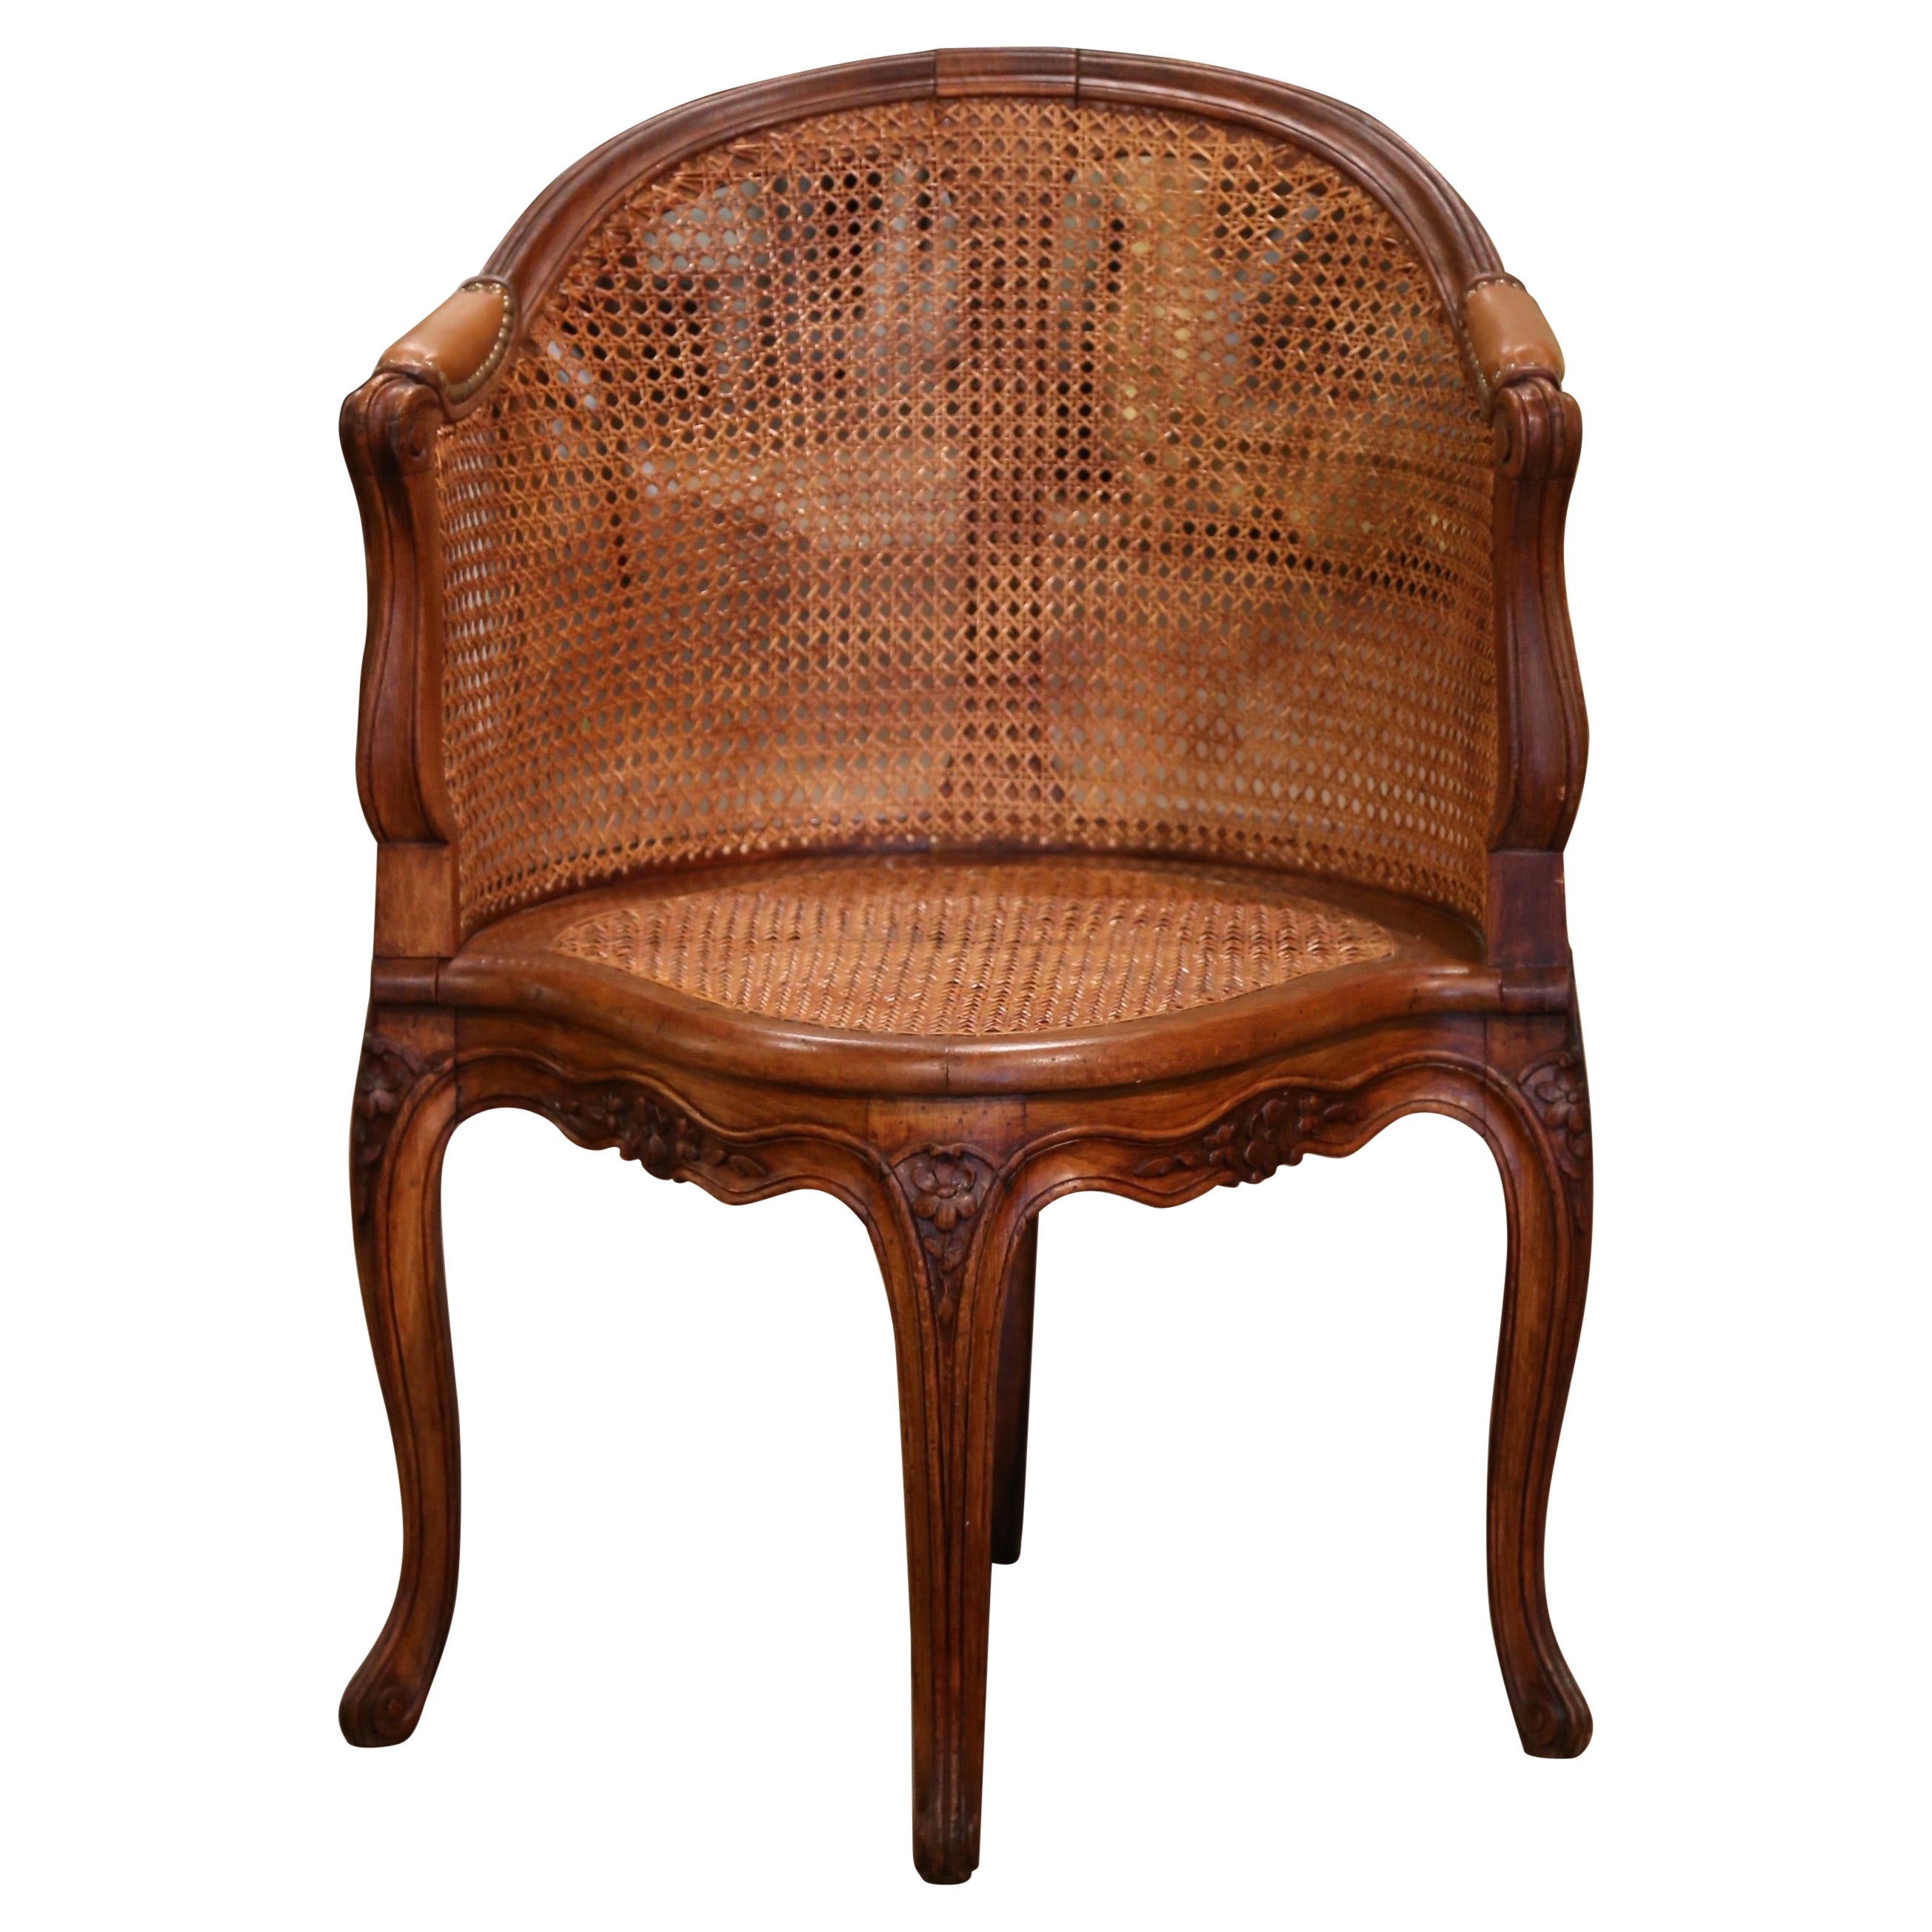 Early 20th Century French Louis XV Cane Desk Armchair with Leather Armrests